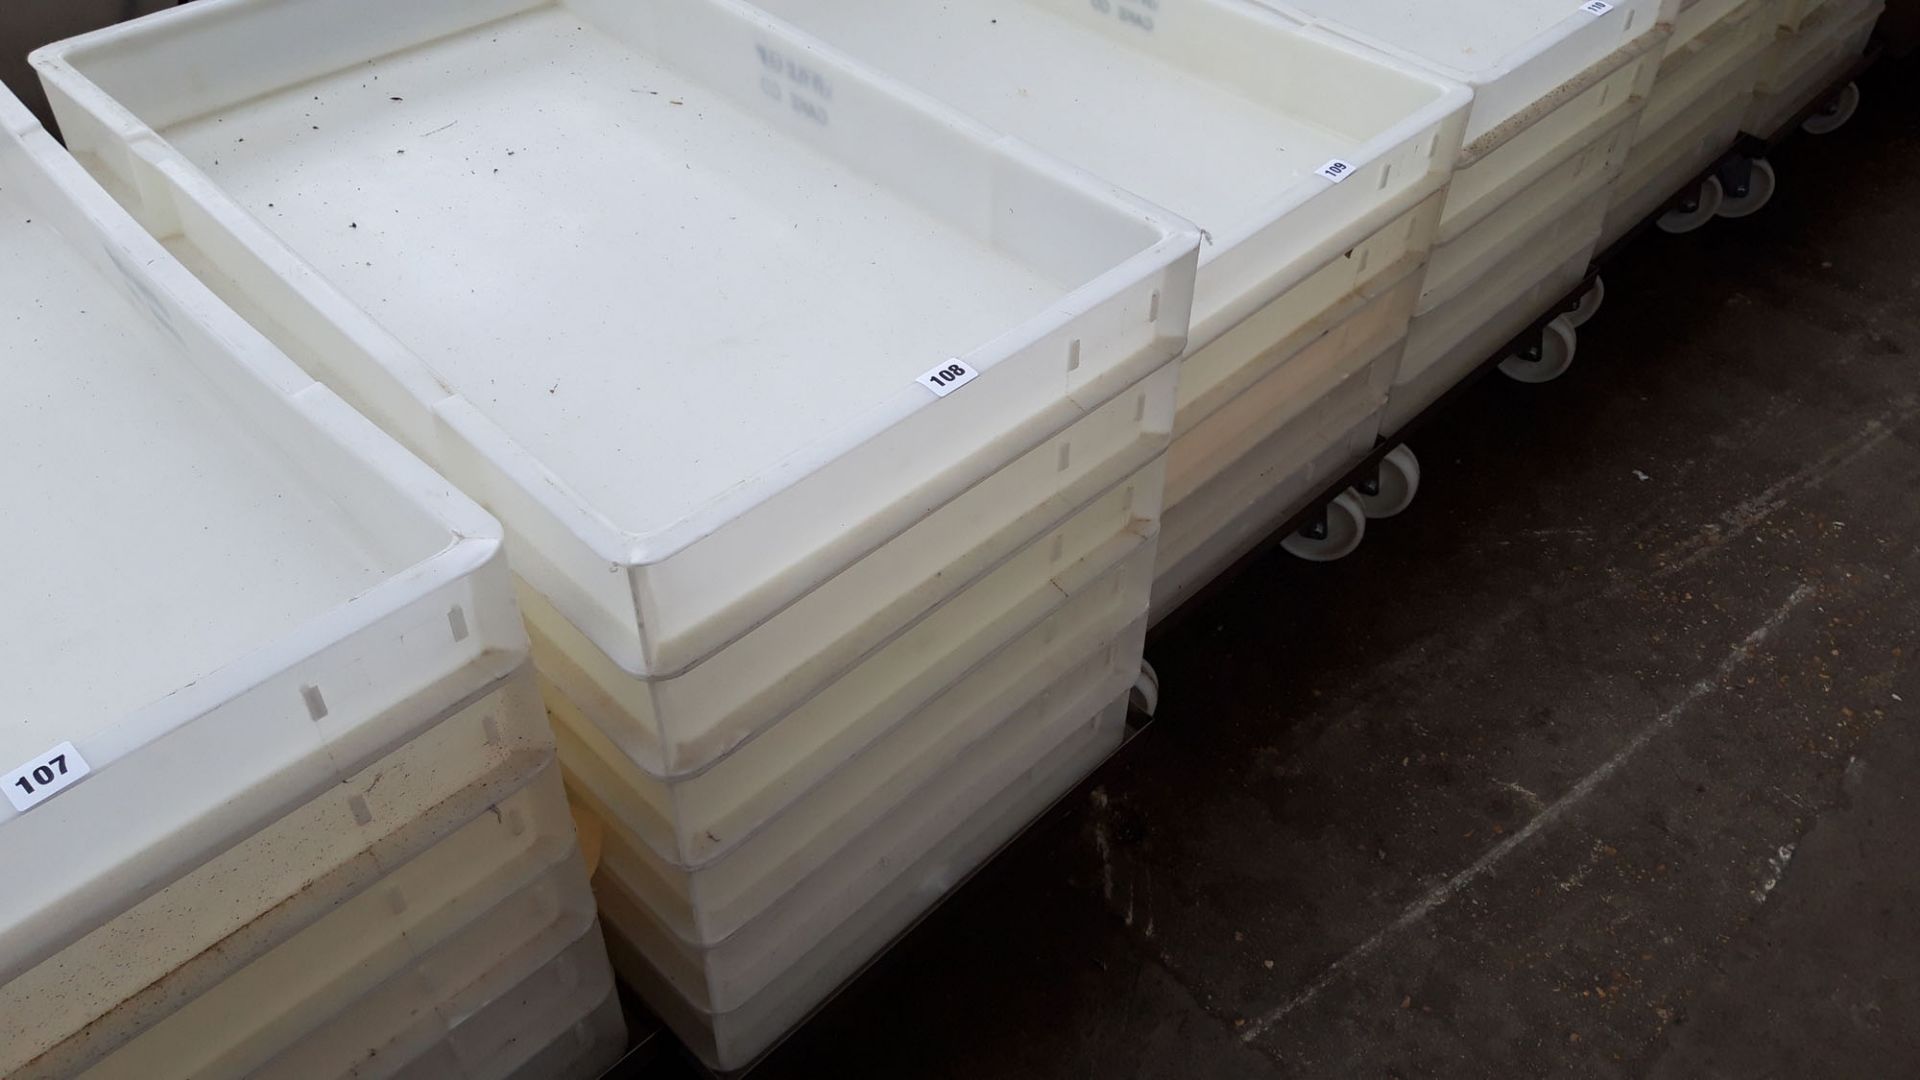 Stack of 6 76cm x 45cm dough trays on a mobile stainless steel trolley